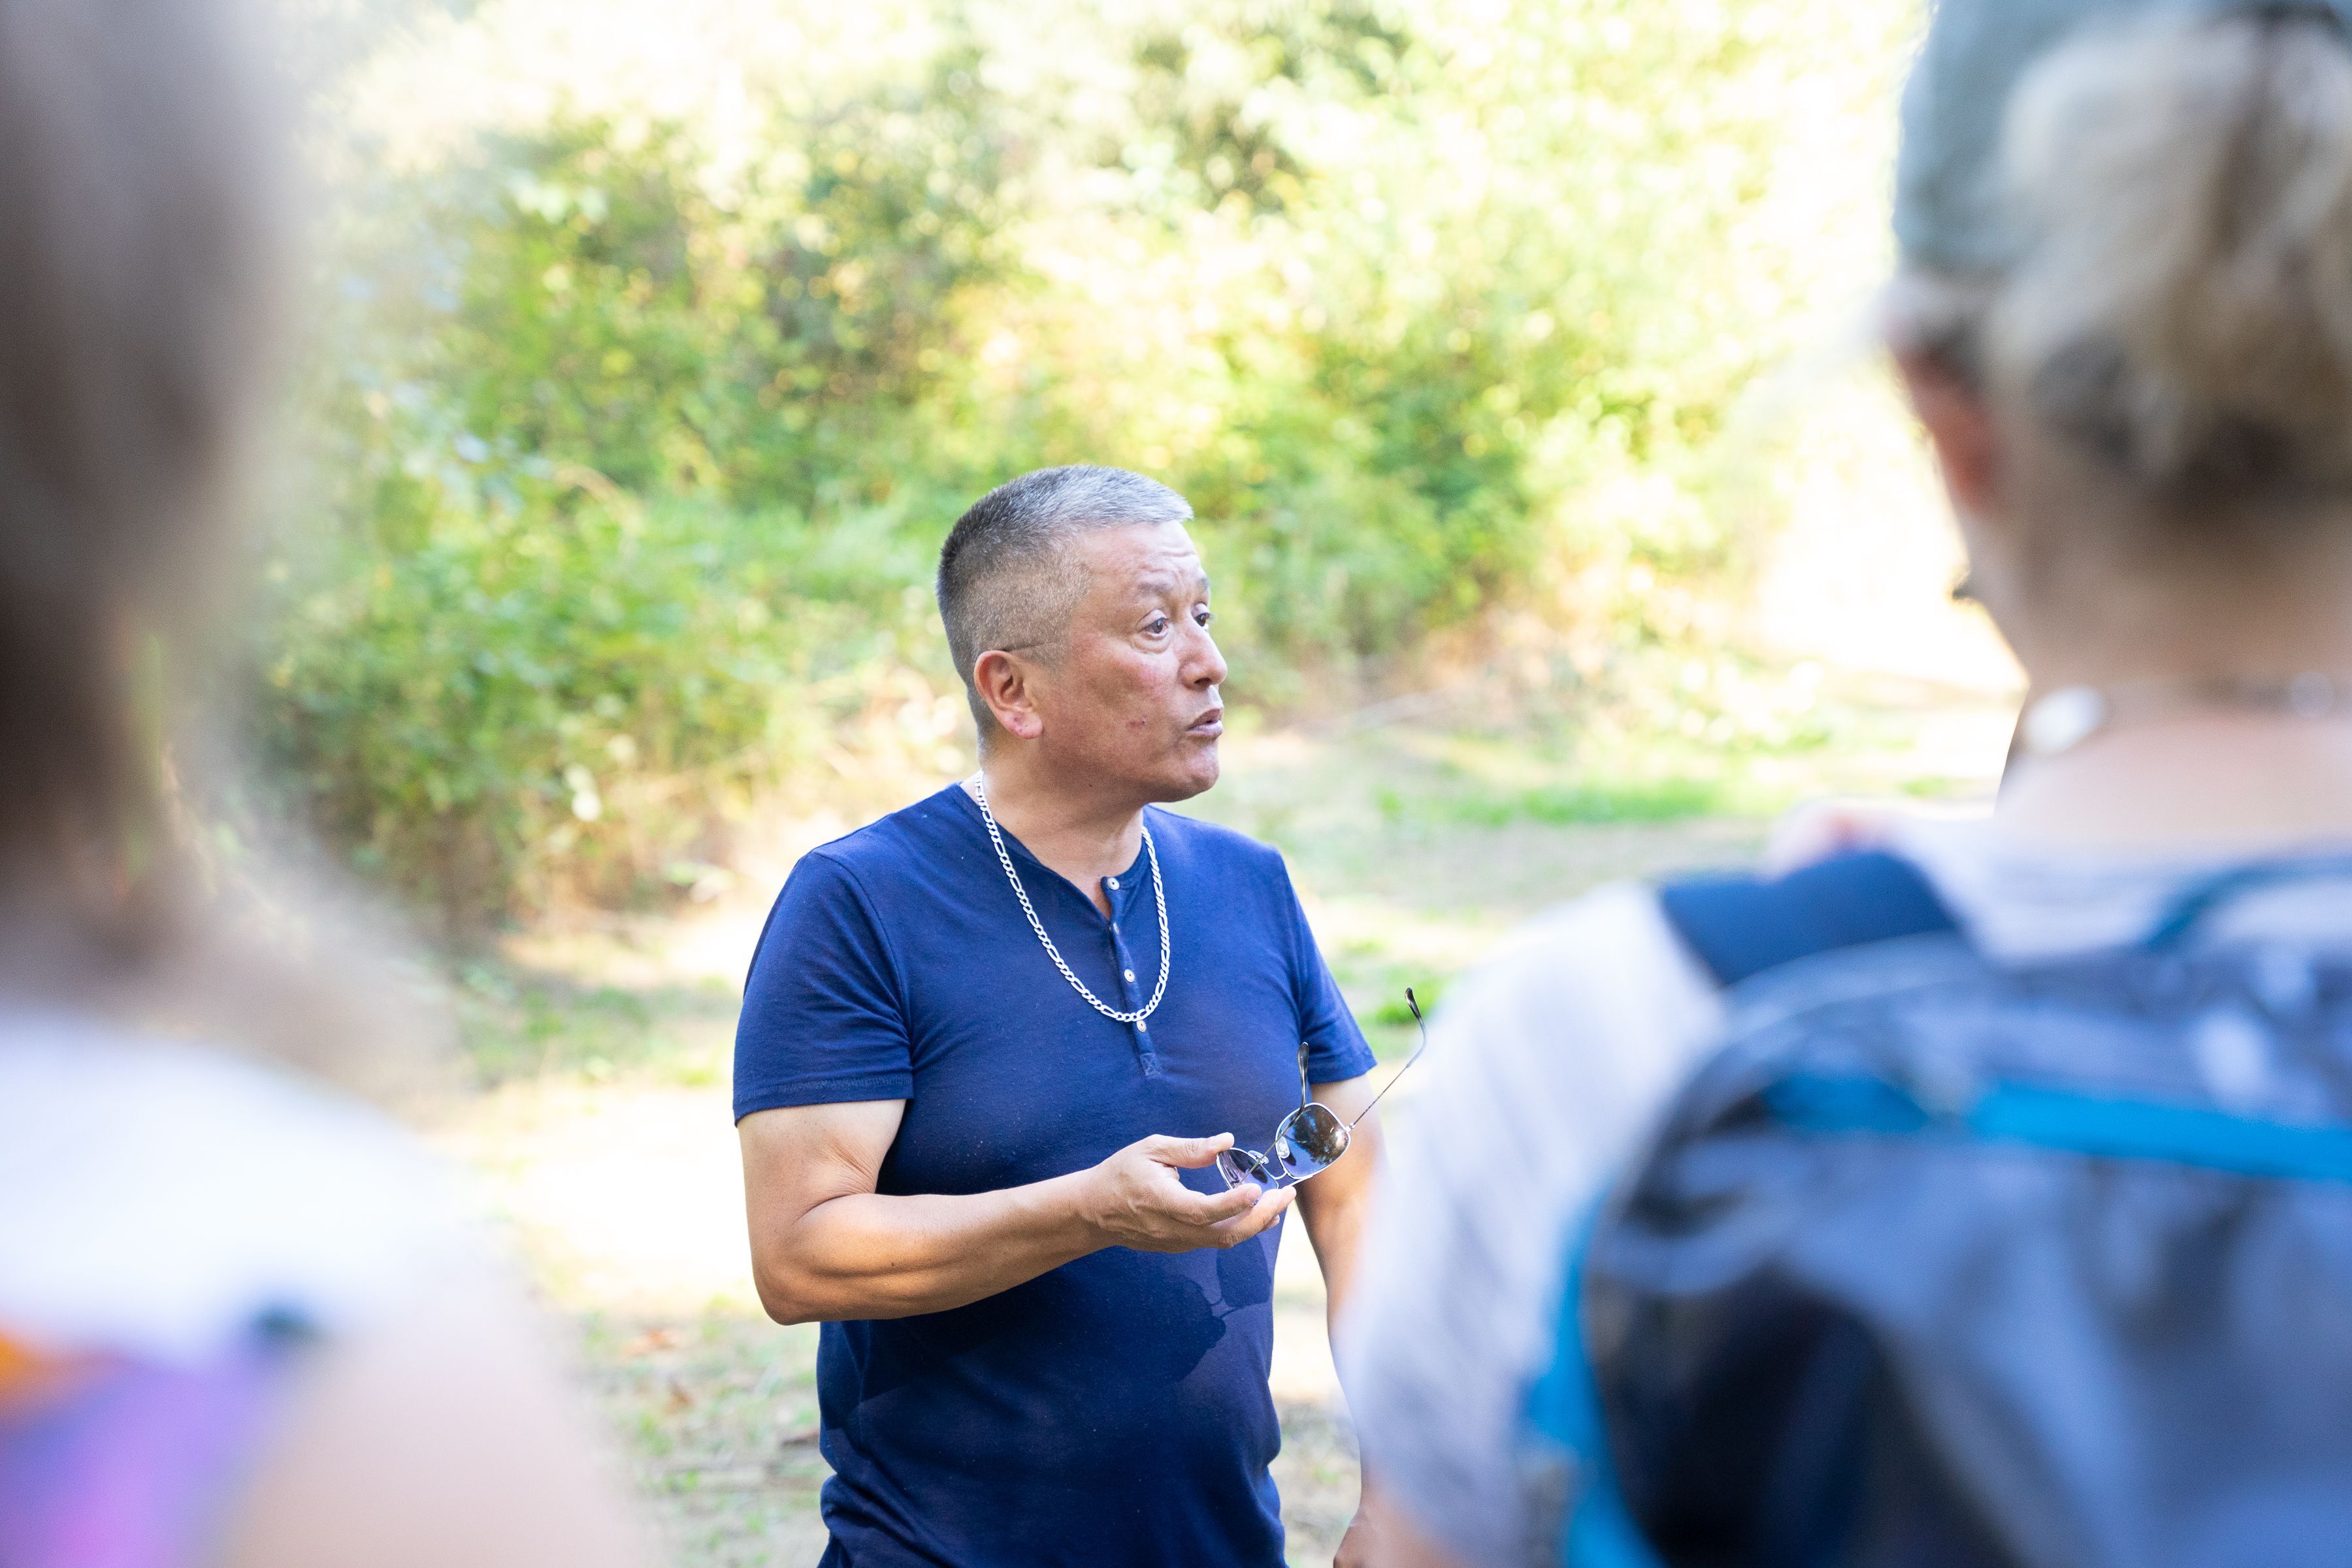 George Chaffee stands looking towards the right of the frame, mid-speech. He is holding a pair of sunglasses in his left hand and is wearing a blue T-shirt. Two people stand in soft focus in the foreground, part of a group he is leading. They are standing in a sunny green grove.